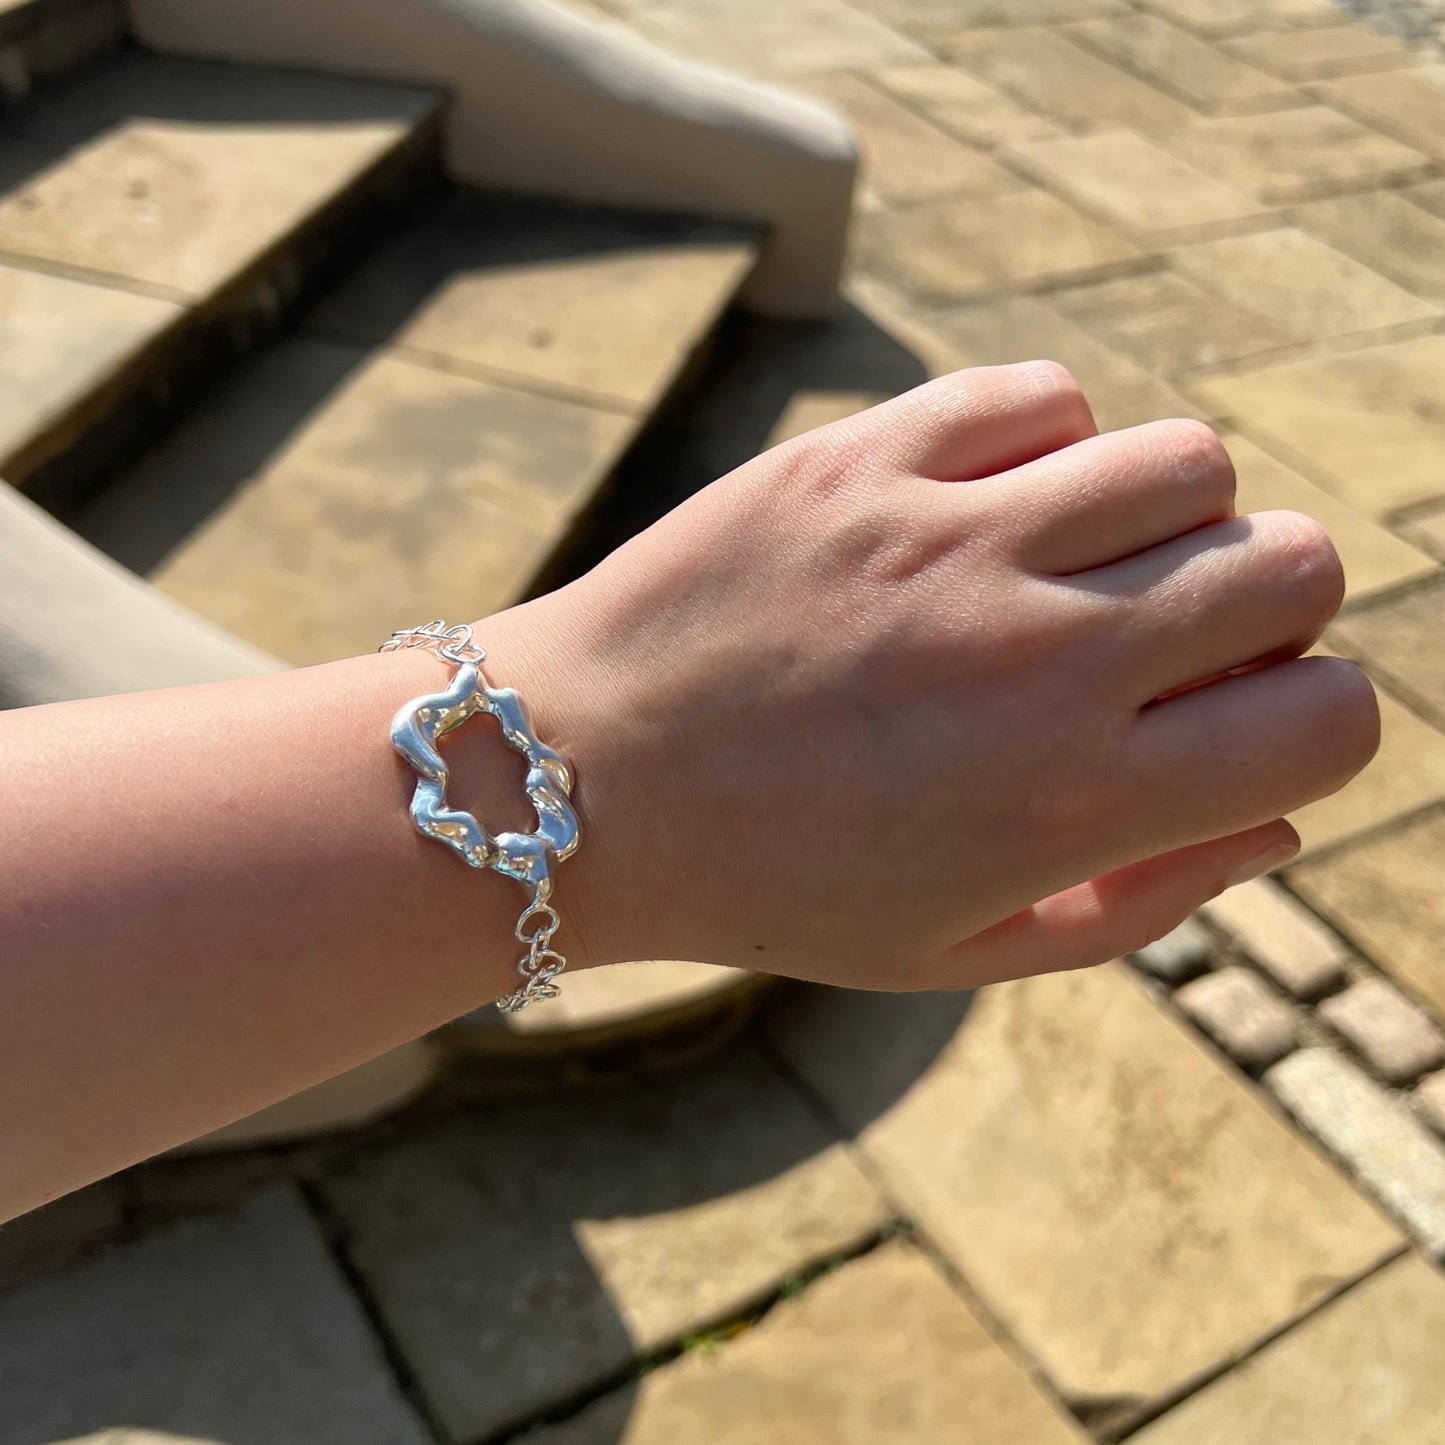 A handmade chunky sterling silver bracelet on a wrist. The centrepiece of the bracelet is shaped like a cloud and the background is of some stone steps and a patio.